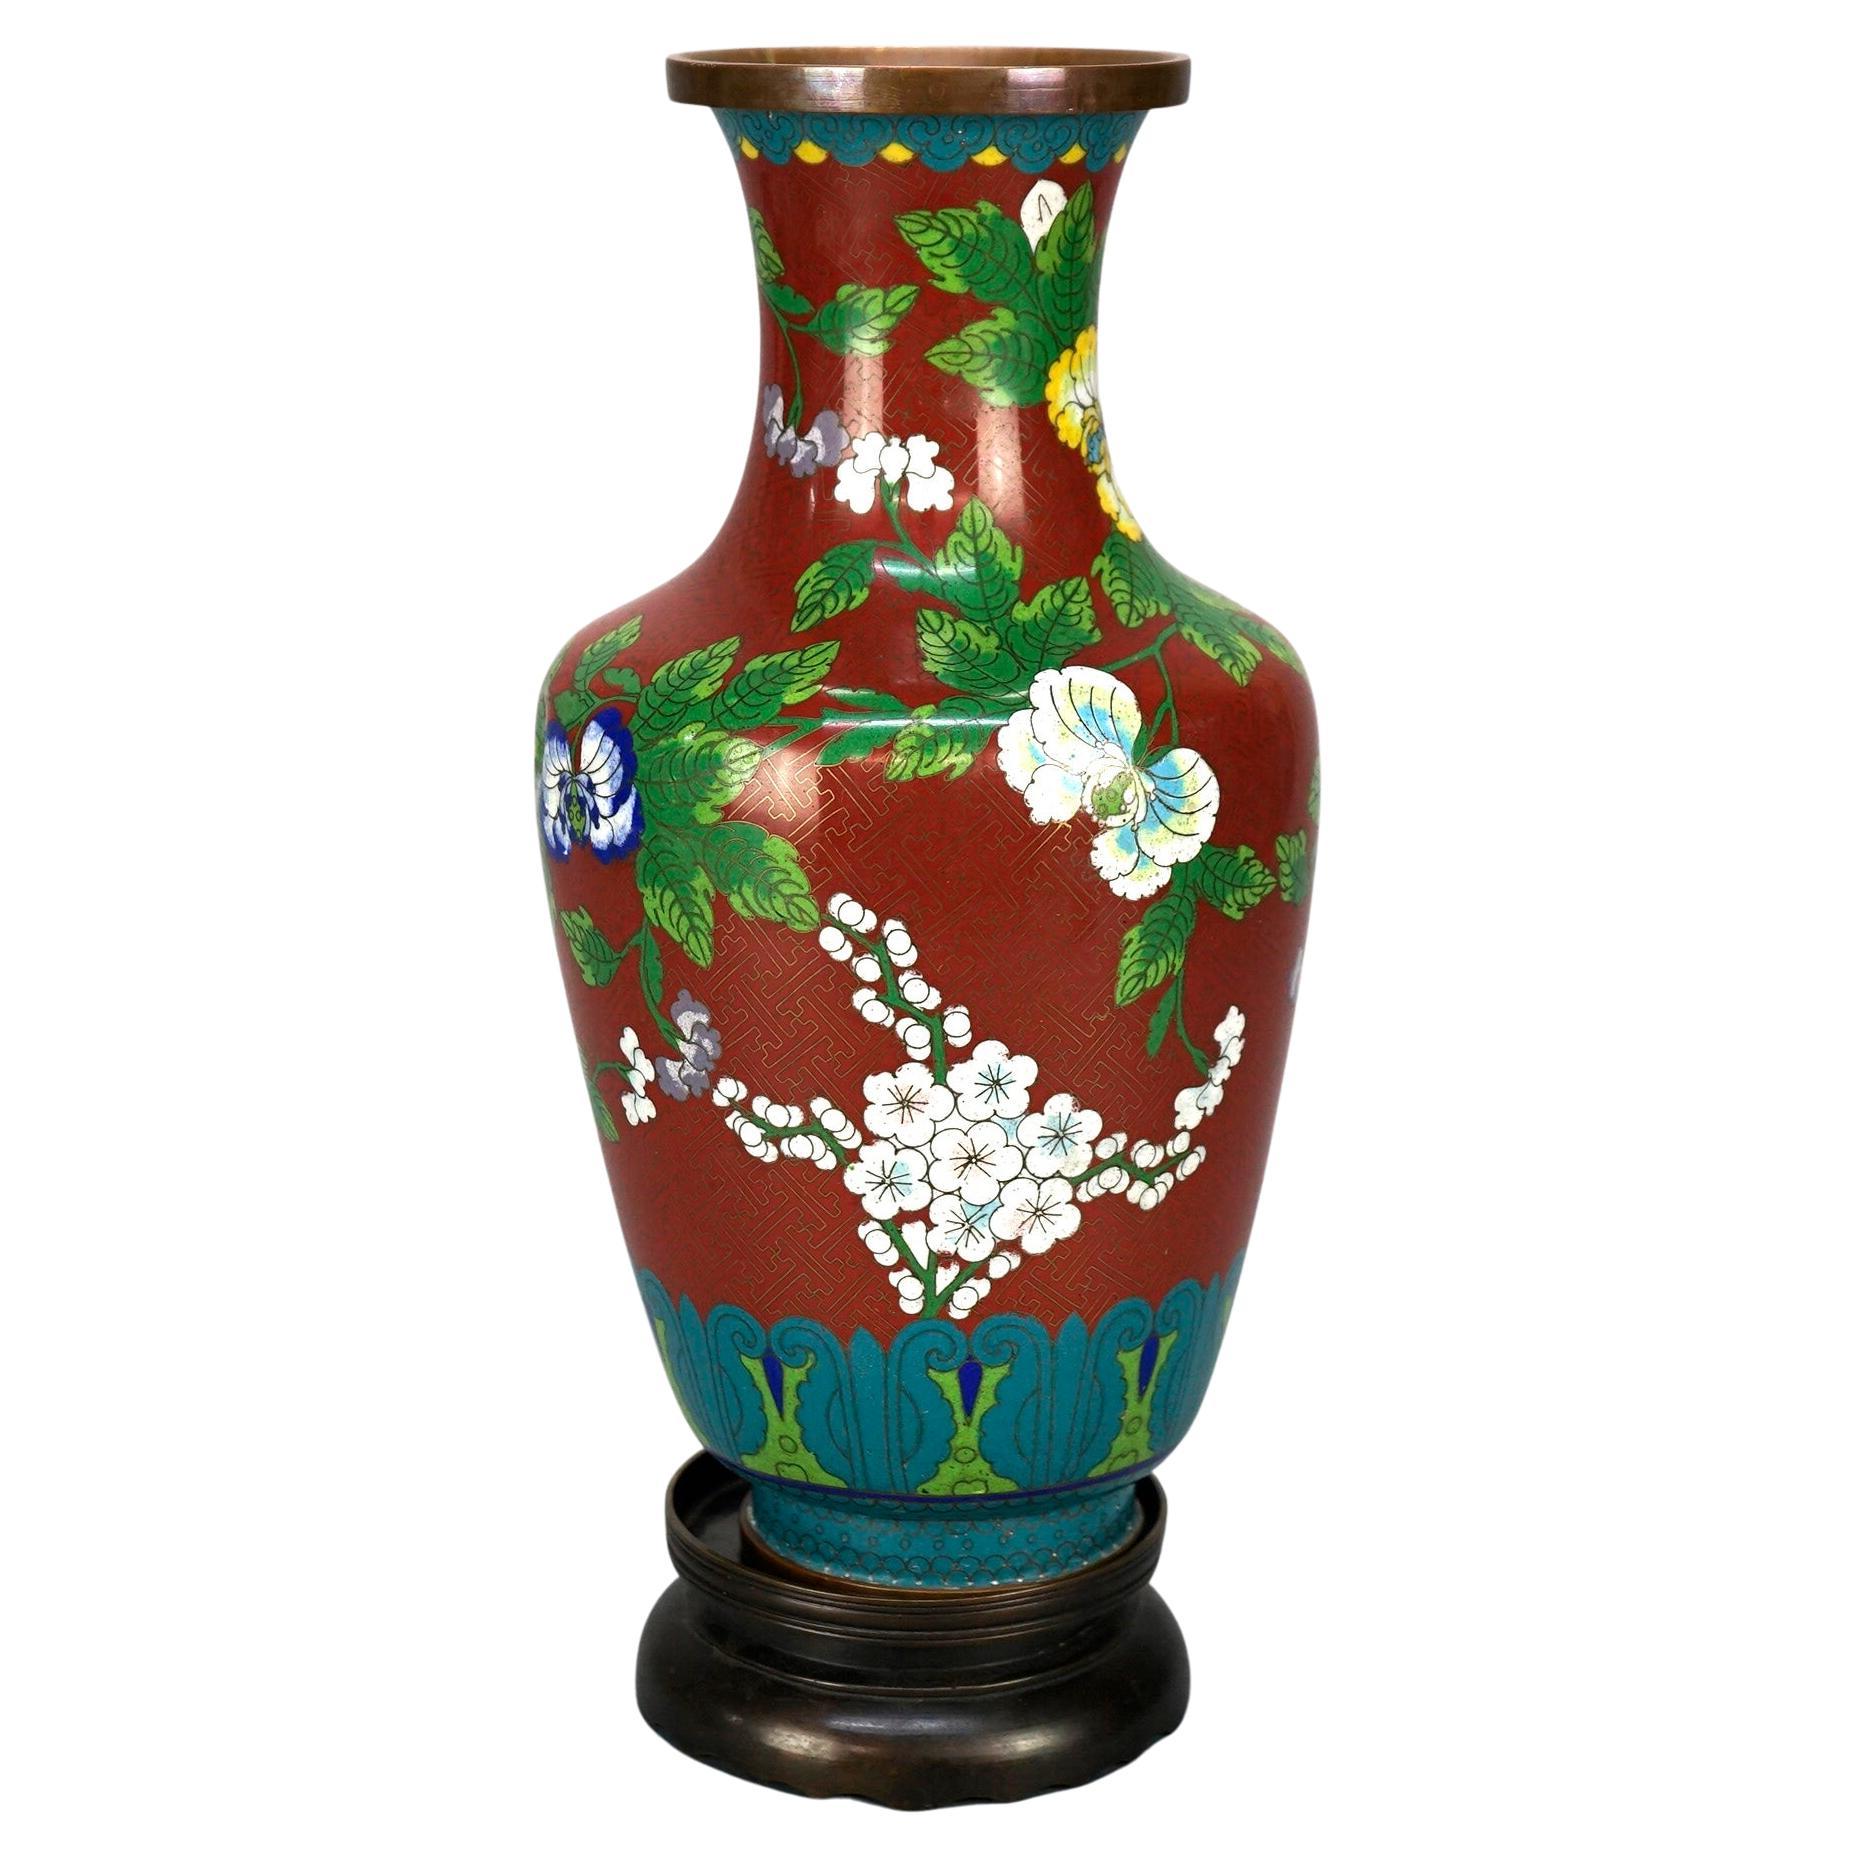 Antique Chinese Cloissone Enameled Vase with Bronze Base, Garden Themed, c1900 For Sale